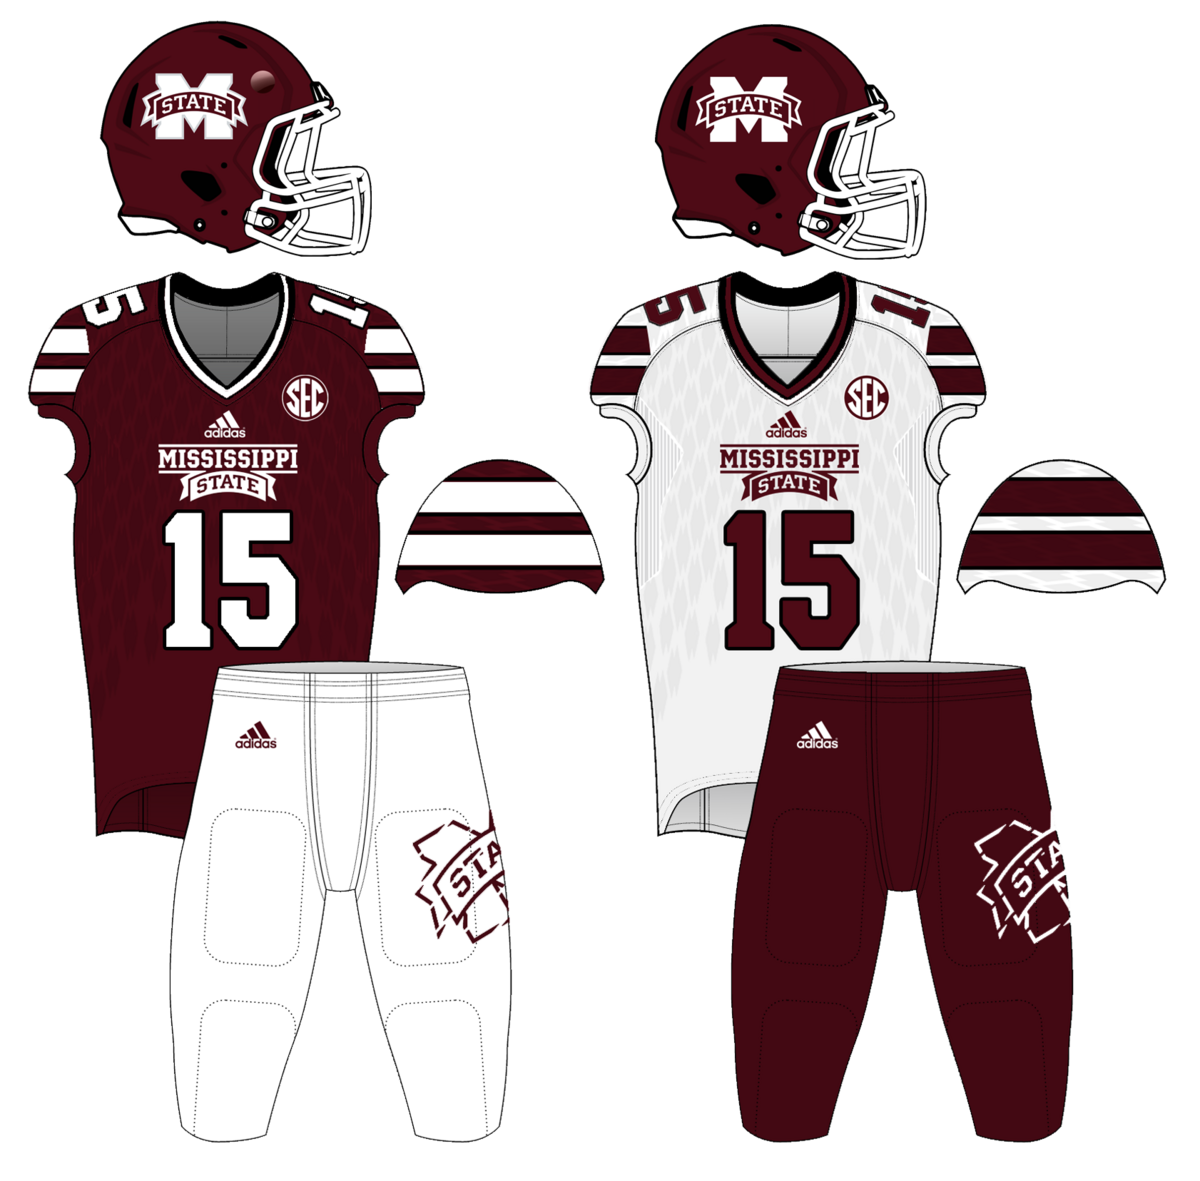 File:Mississippi State Football Uniforms 2020.png - Wikipedia